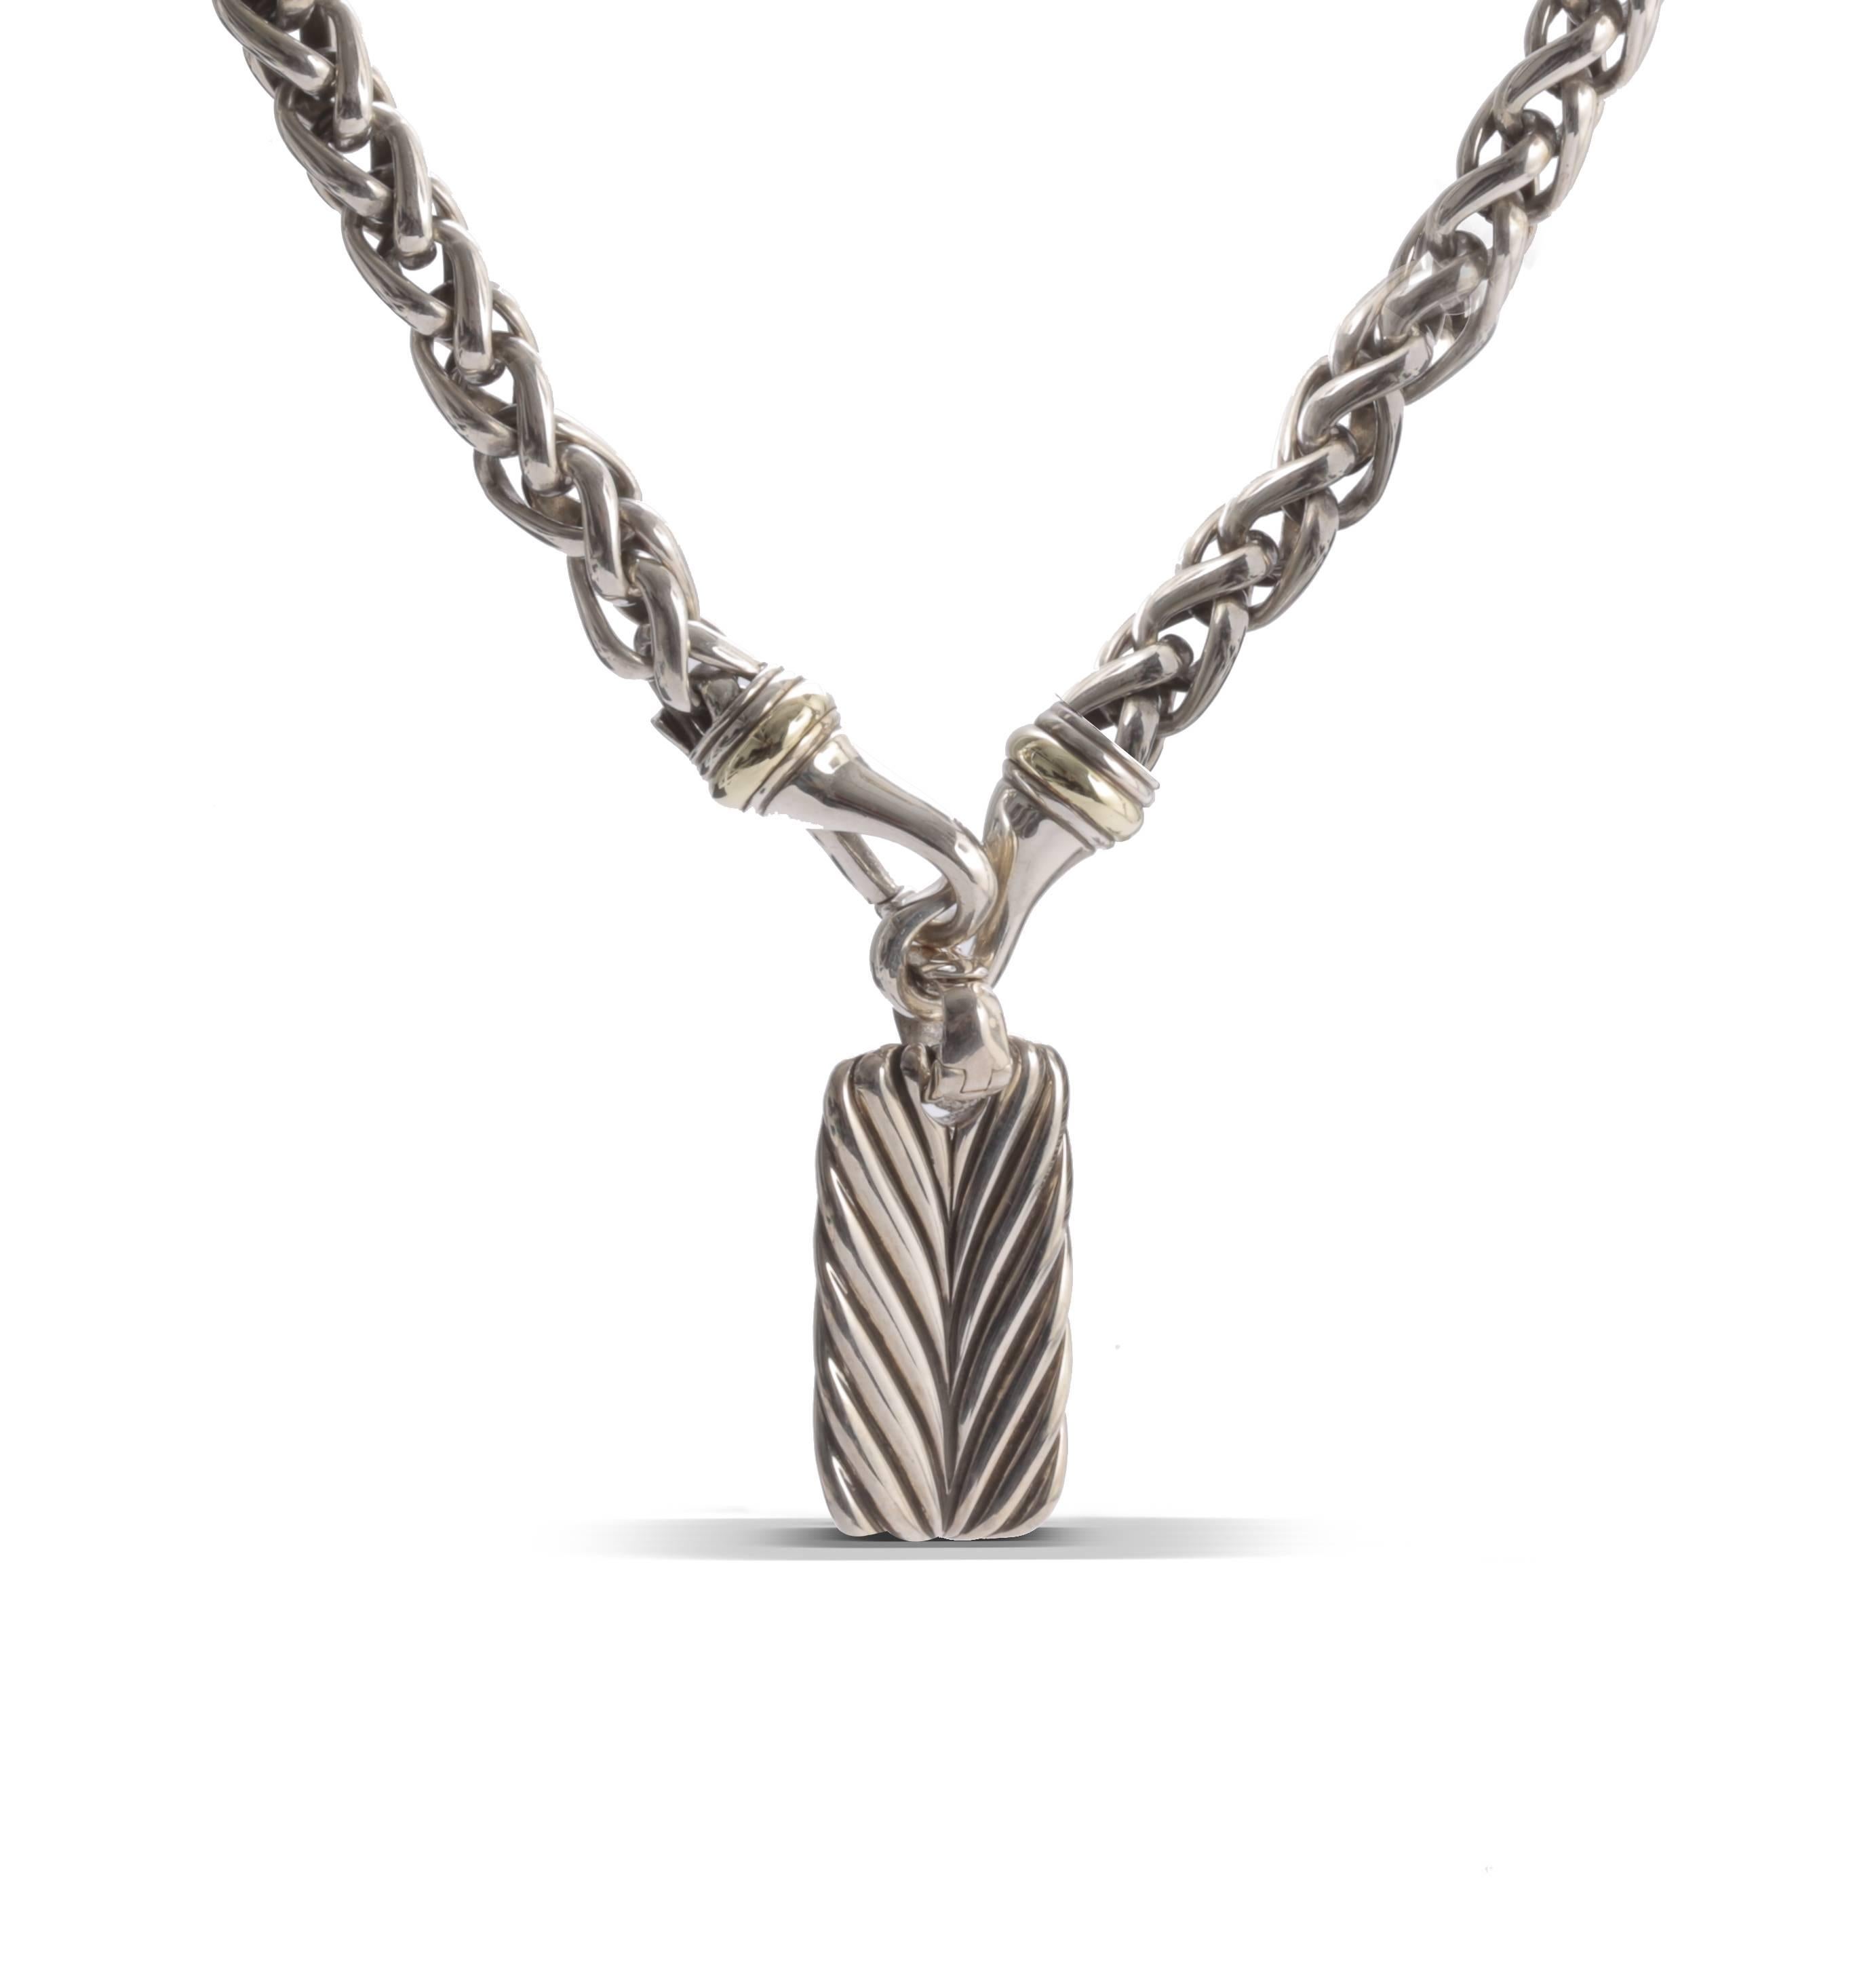 Previously loved sterling silver David Yurman Sculpted Cable dog tag with cable texture throughout with hinged bail (only the dog tag reflected in price).



